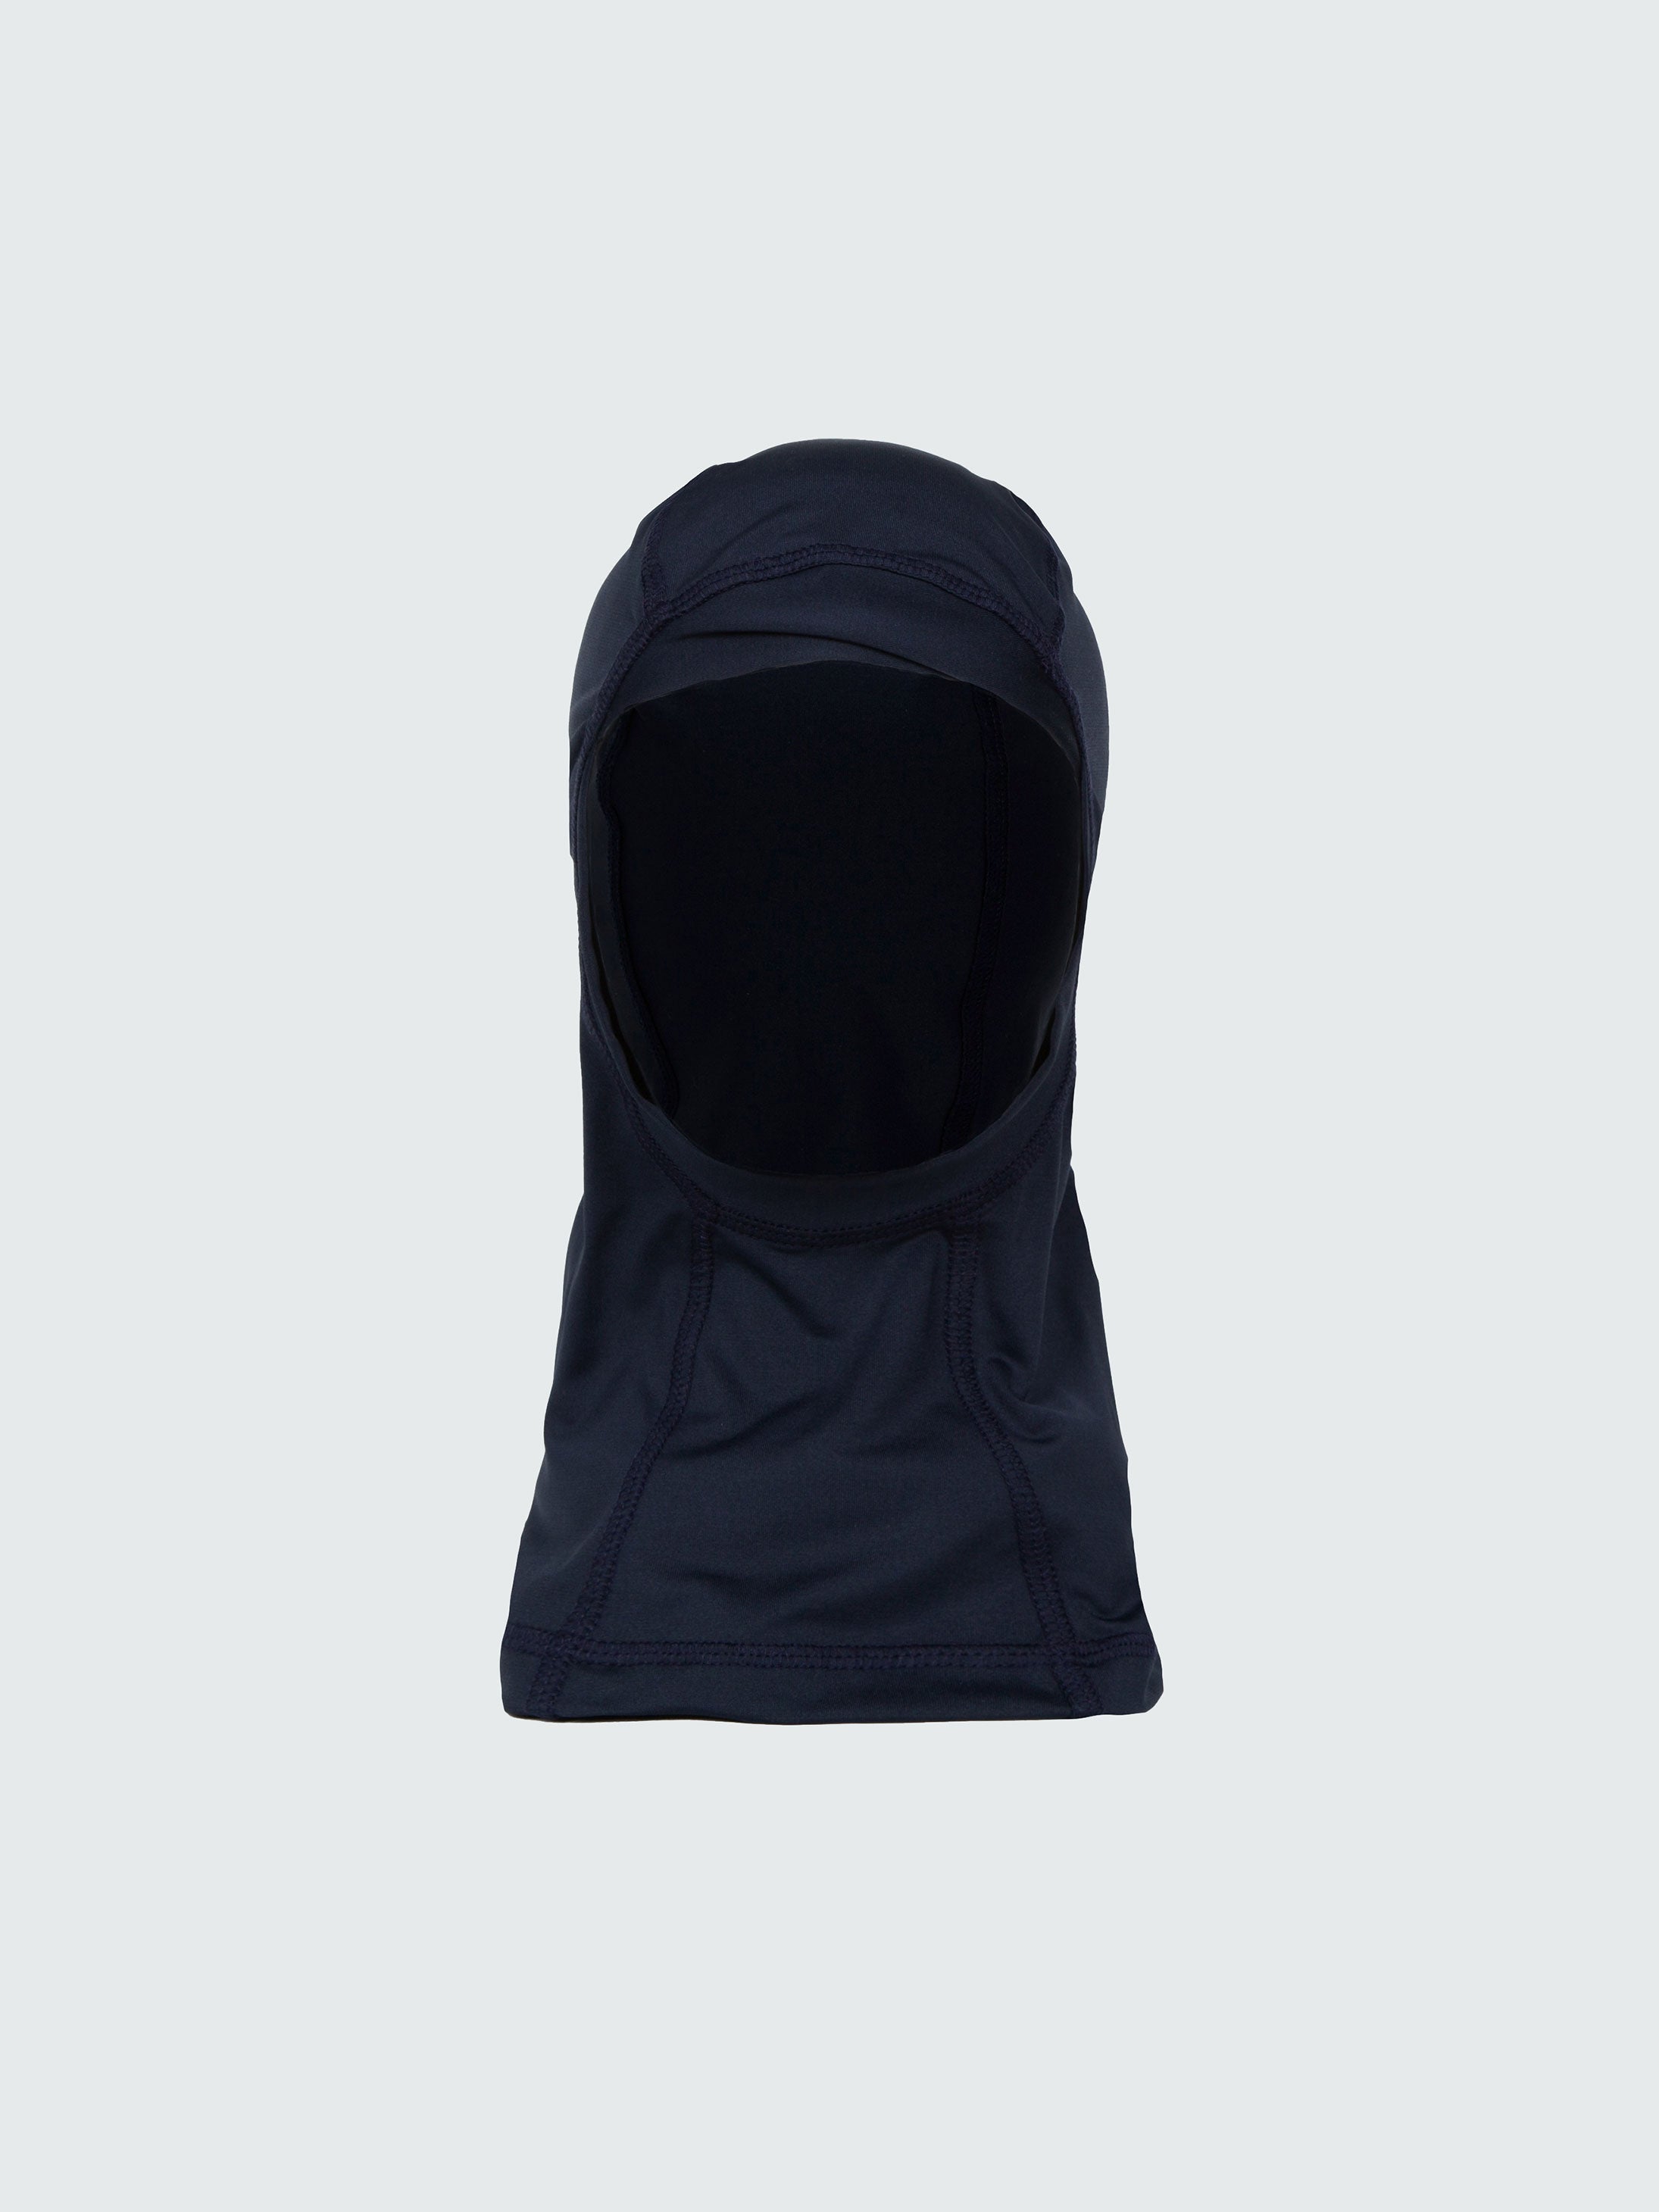 Into The Sea' Hijab in Navy | Finisterre